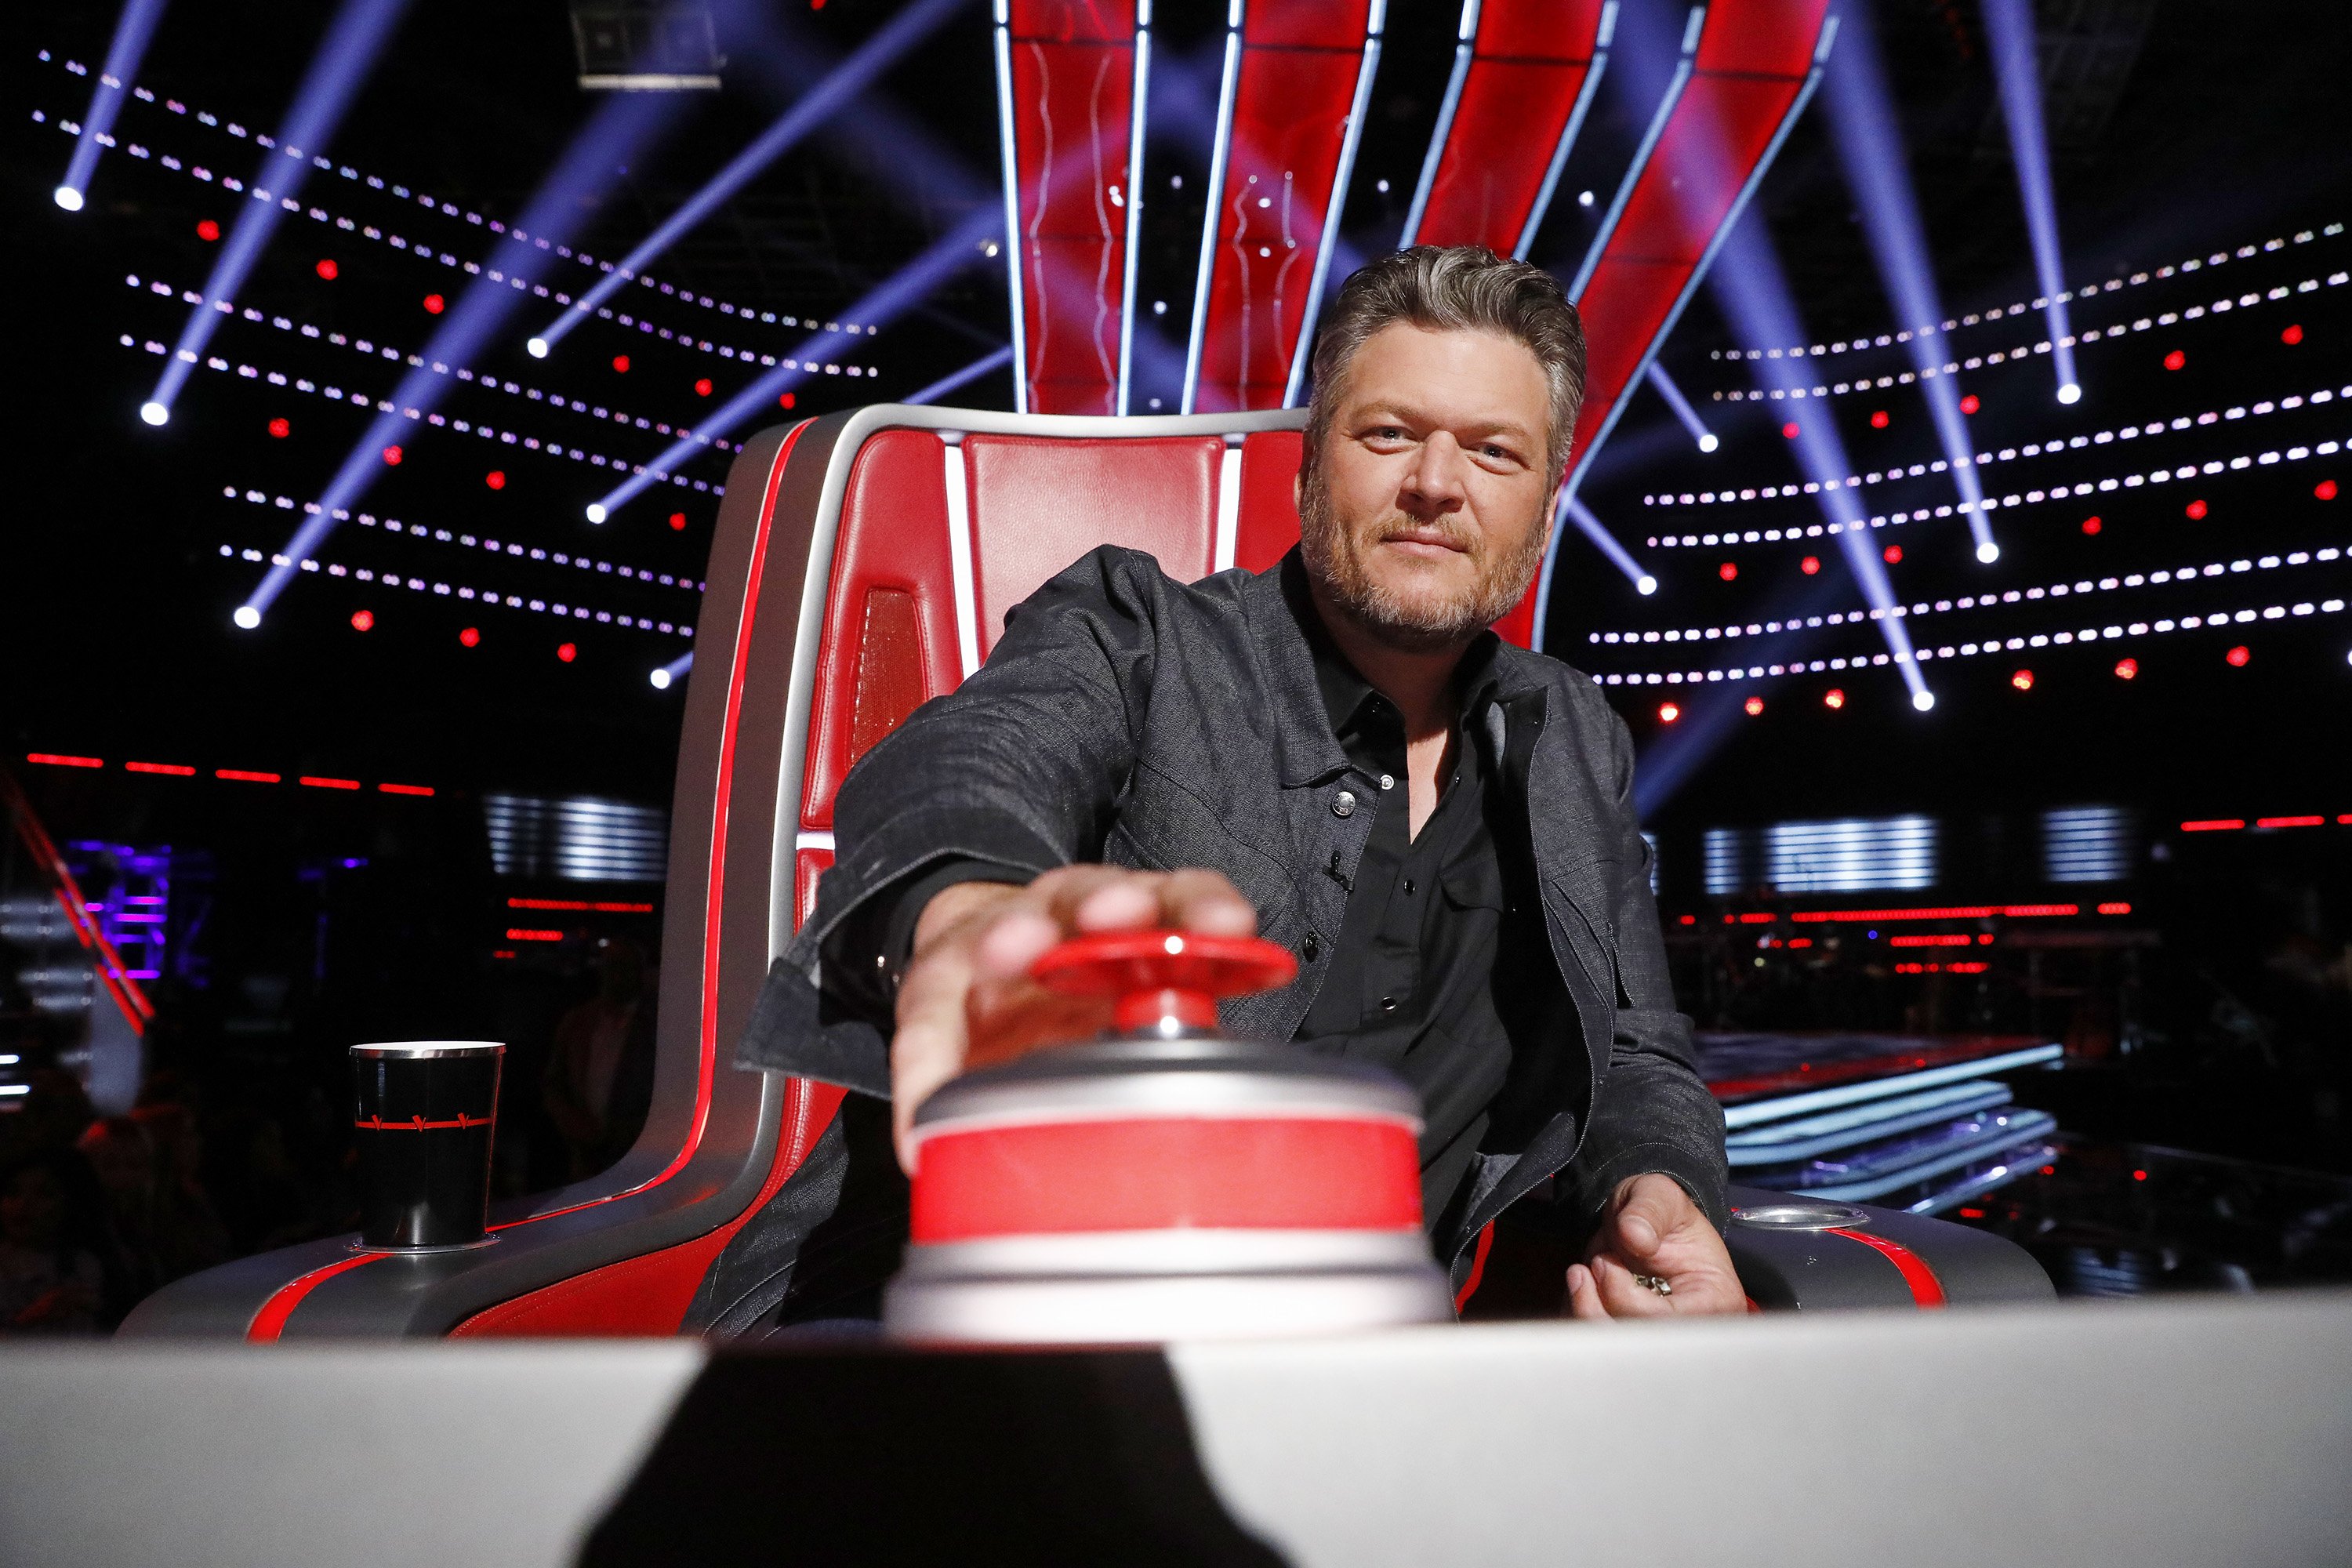 Blake Shelton during the Blind Auditions on Season 18 of "The Voice." | Source: Getty Images.